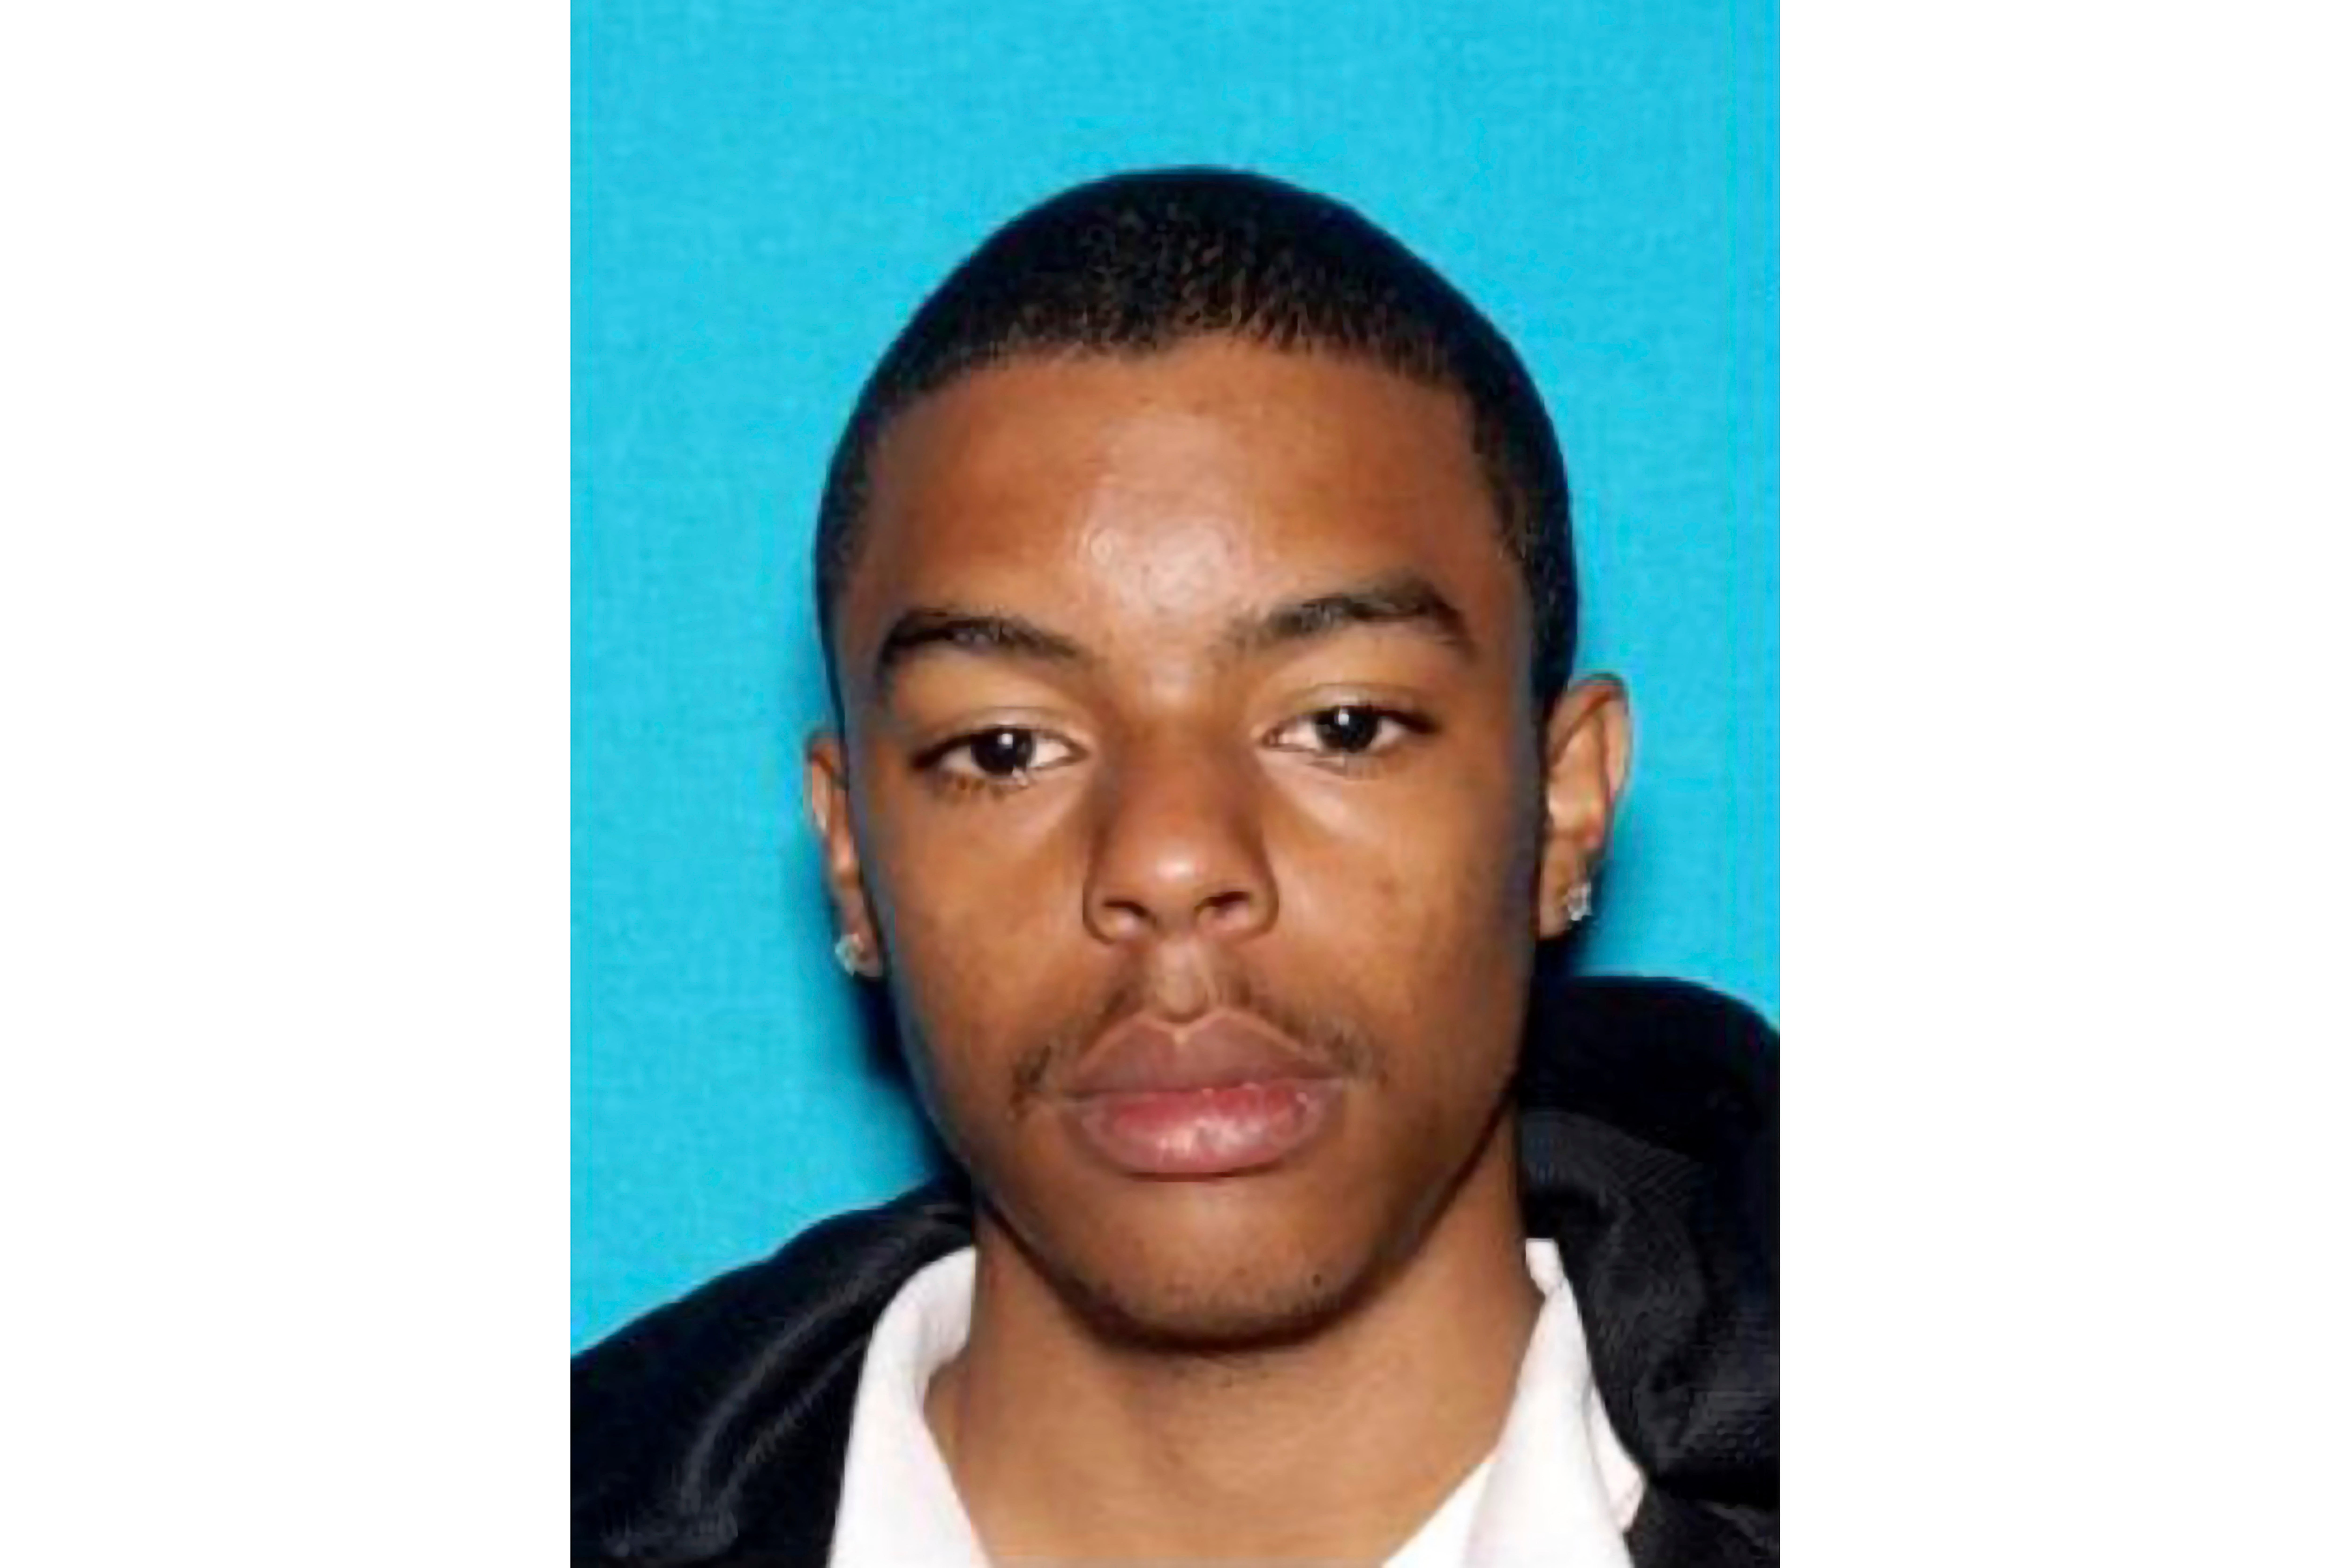 An undated photo of Zuberi. Authorities say they have linked him to four other violent sexual assaults